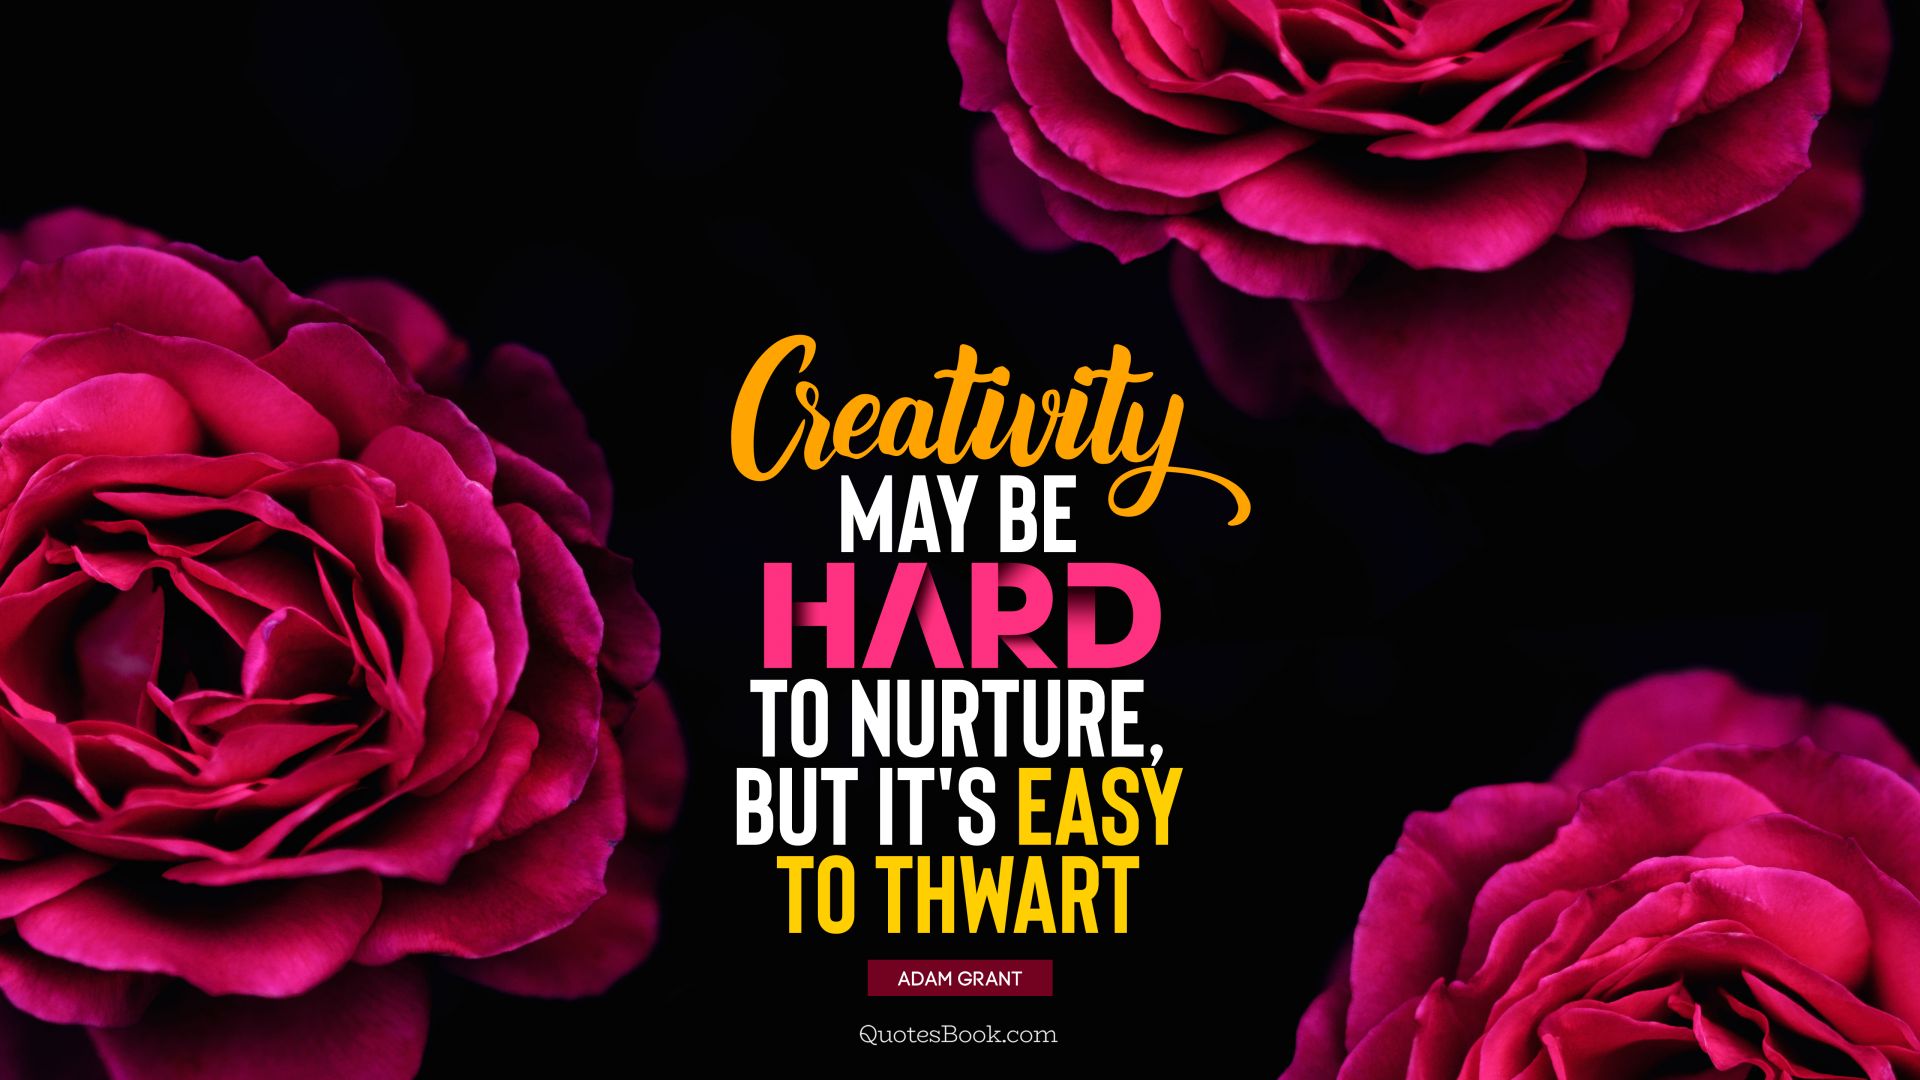 Creativity may be hard to nurture, but it's easy to thwart. - Quote by Adam Grant